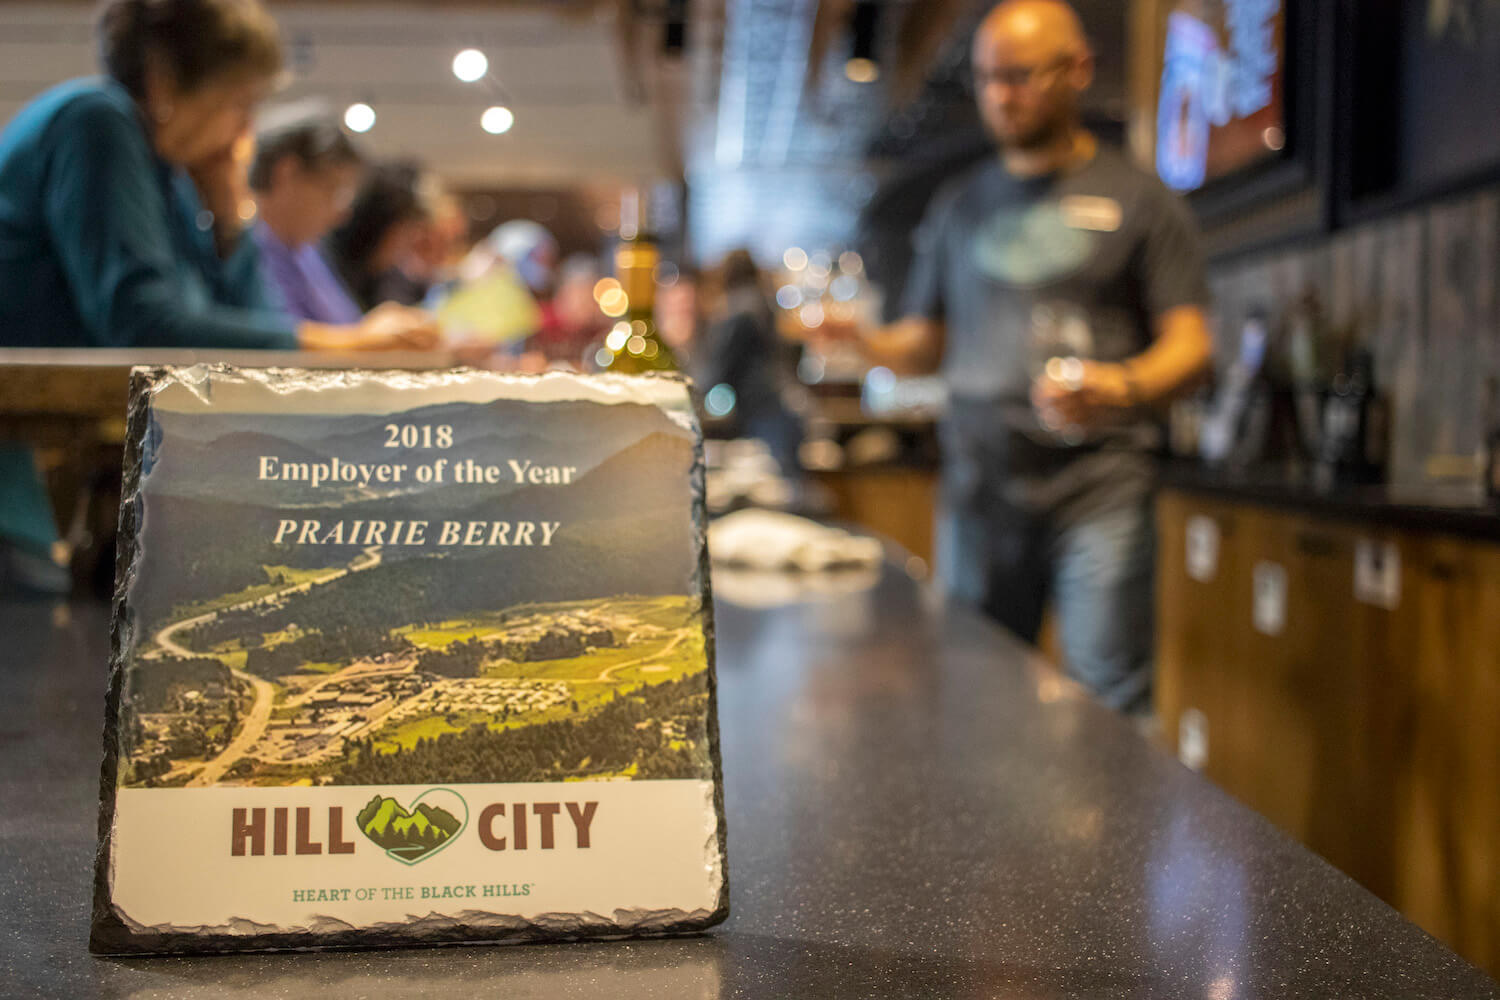 We've been recognized as one of the top employers in Hill City.